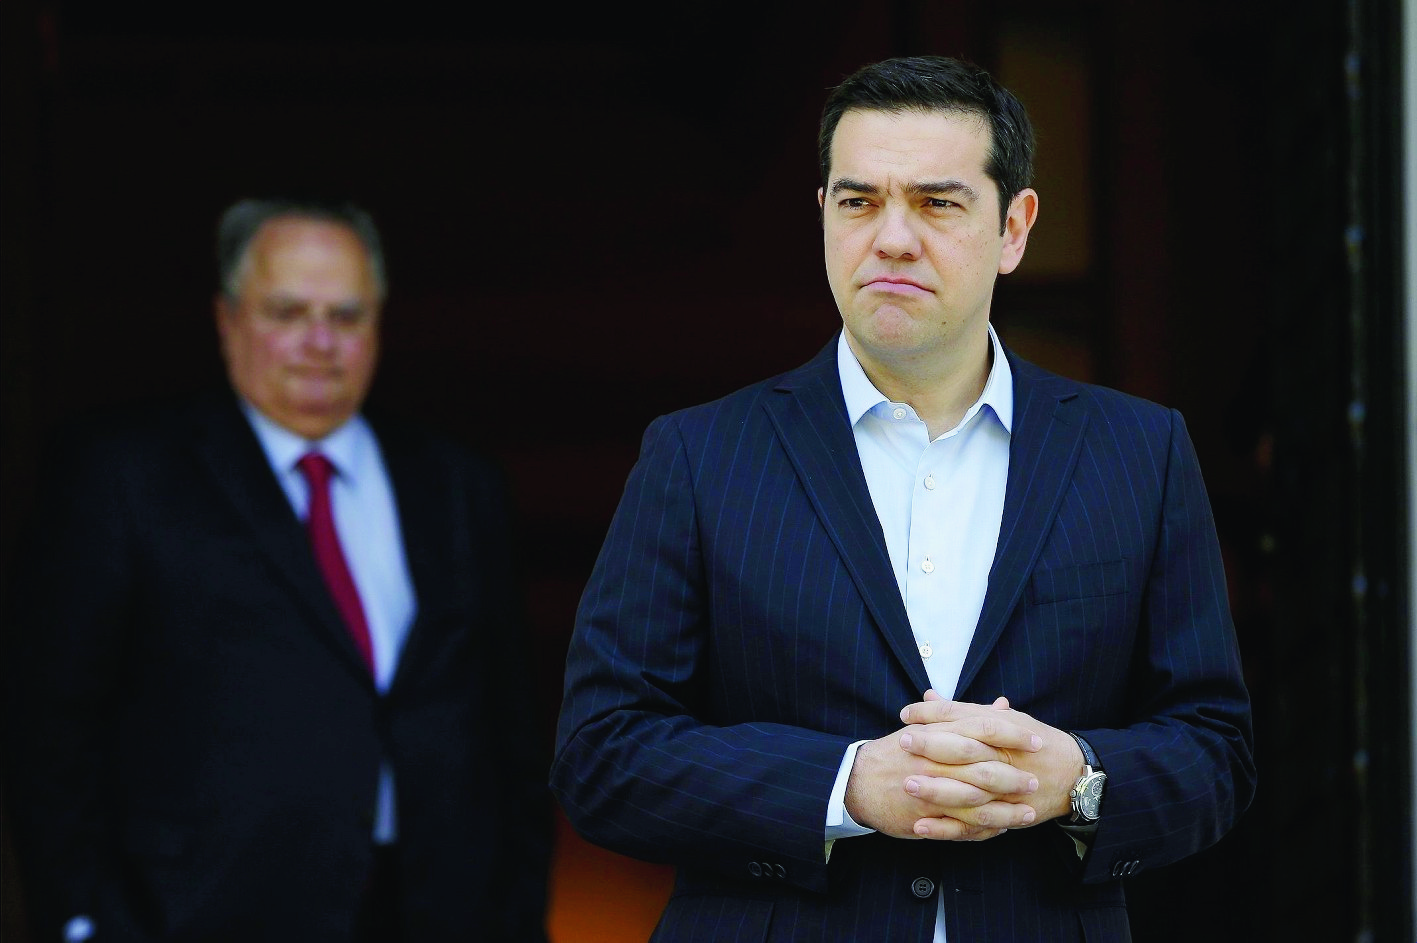 Greece's Prime Minister Alexis Tsirpas, right, waits for the arrival of the Cypriot President Nicos Anastasiades at the Maximos Mansion in Athens, Wednesday, May 25, 2016. Greece has won an essential batch of bailout funds from international creditors following agreement among the 19 eurozone finance ministers and can start looking forward to debt relief in the future. (AP Photo/Thanassis Stavrakis) Greece Bailout